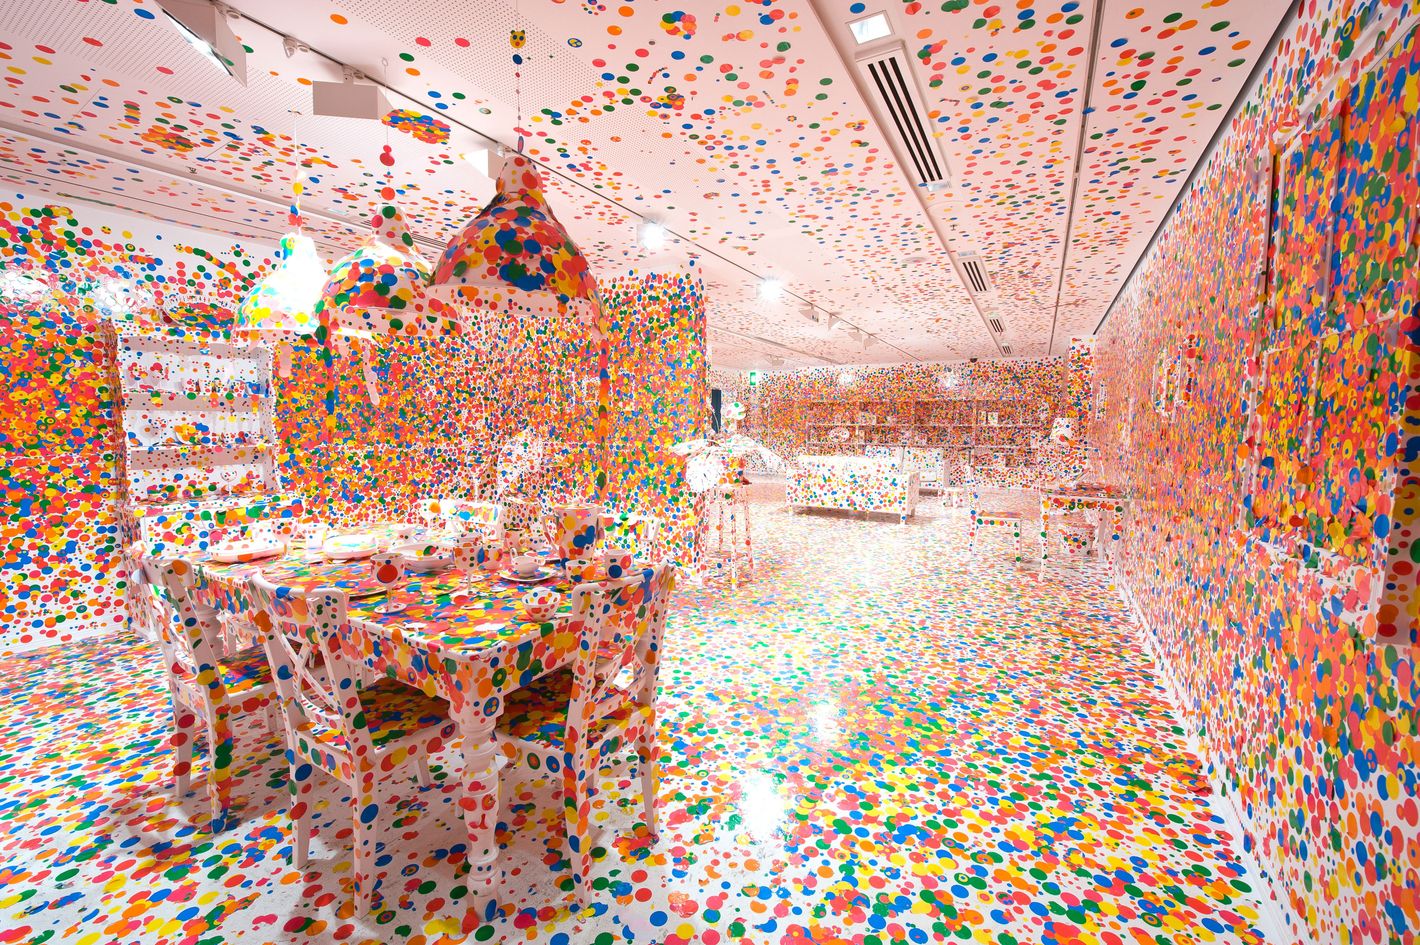 Yayoi Kusama's polka-dotted fever dream comes to Louis Vuitton